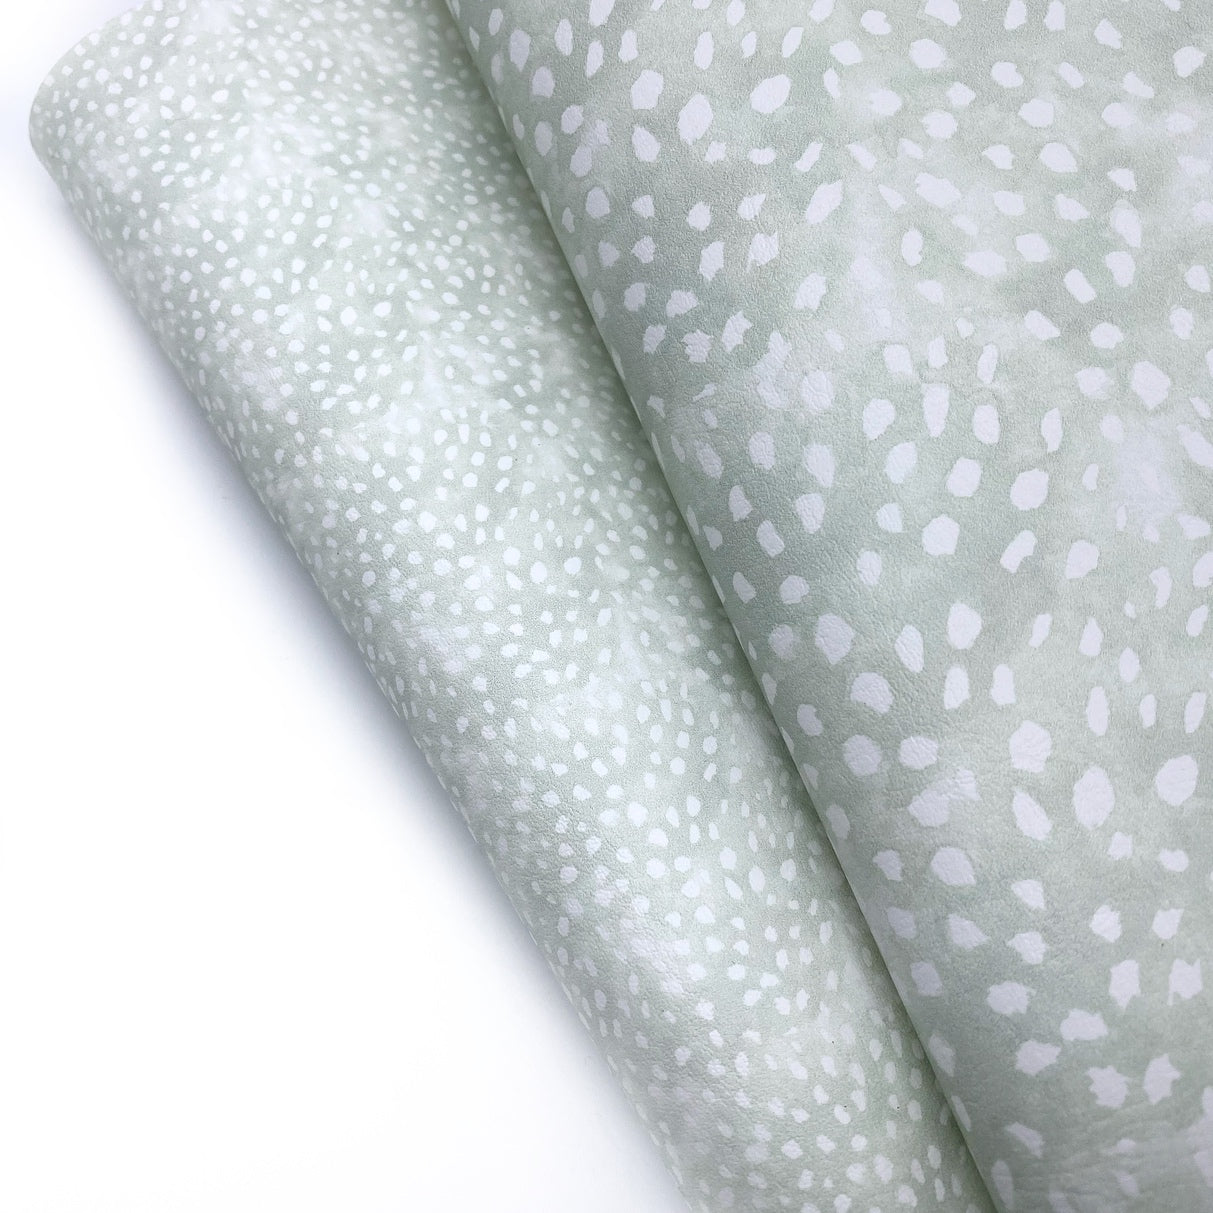 Mint Freckled Fawn Premium Faux Leather Fabric Sheets